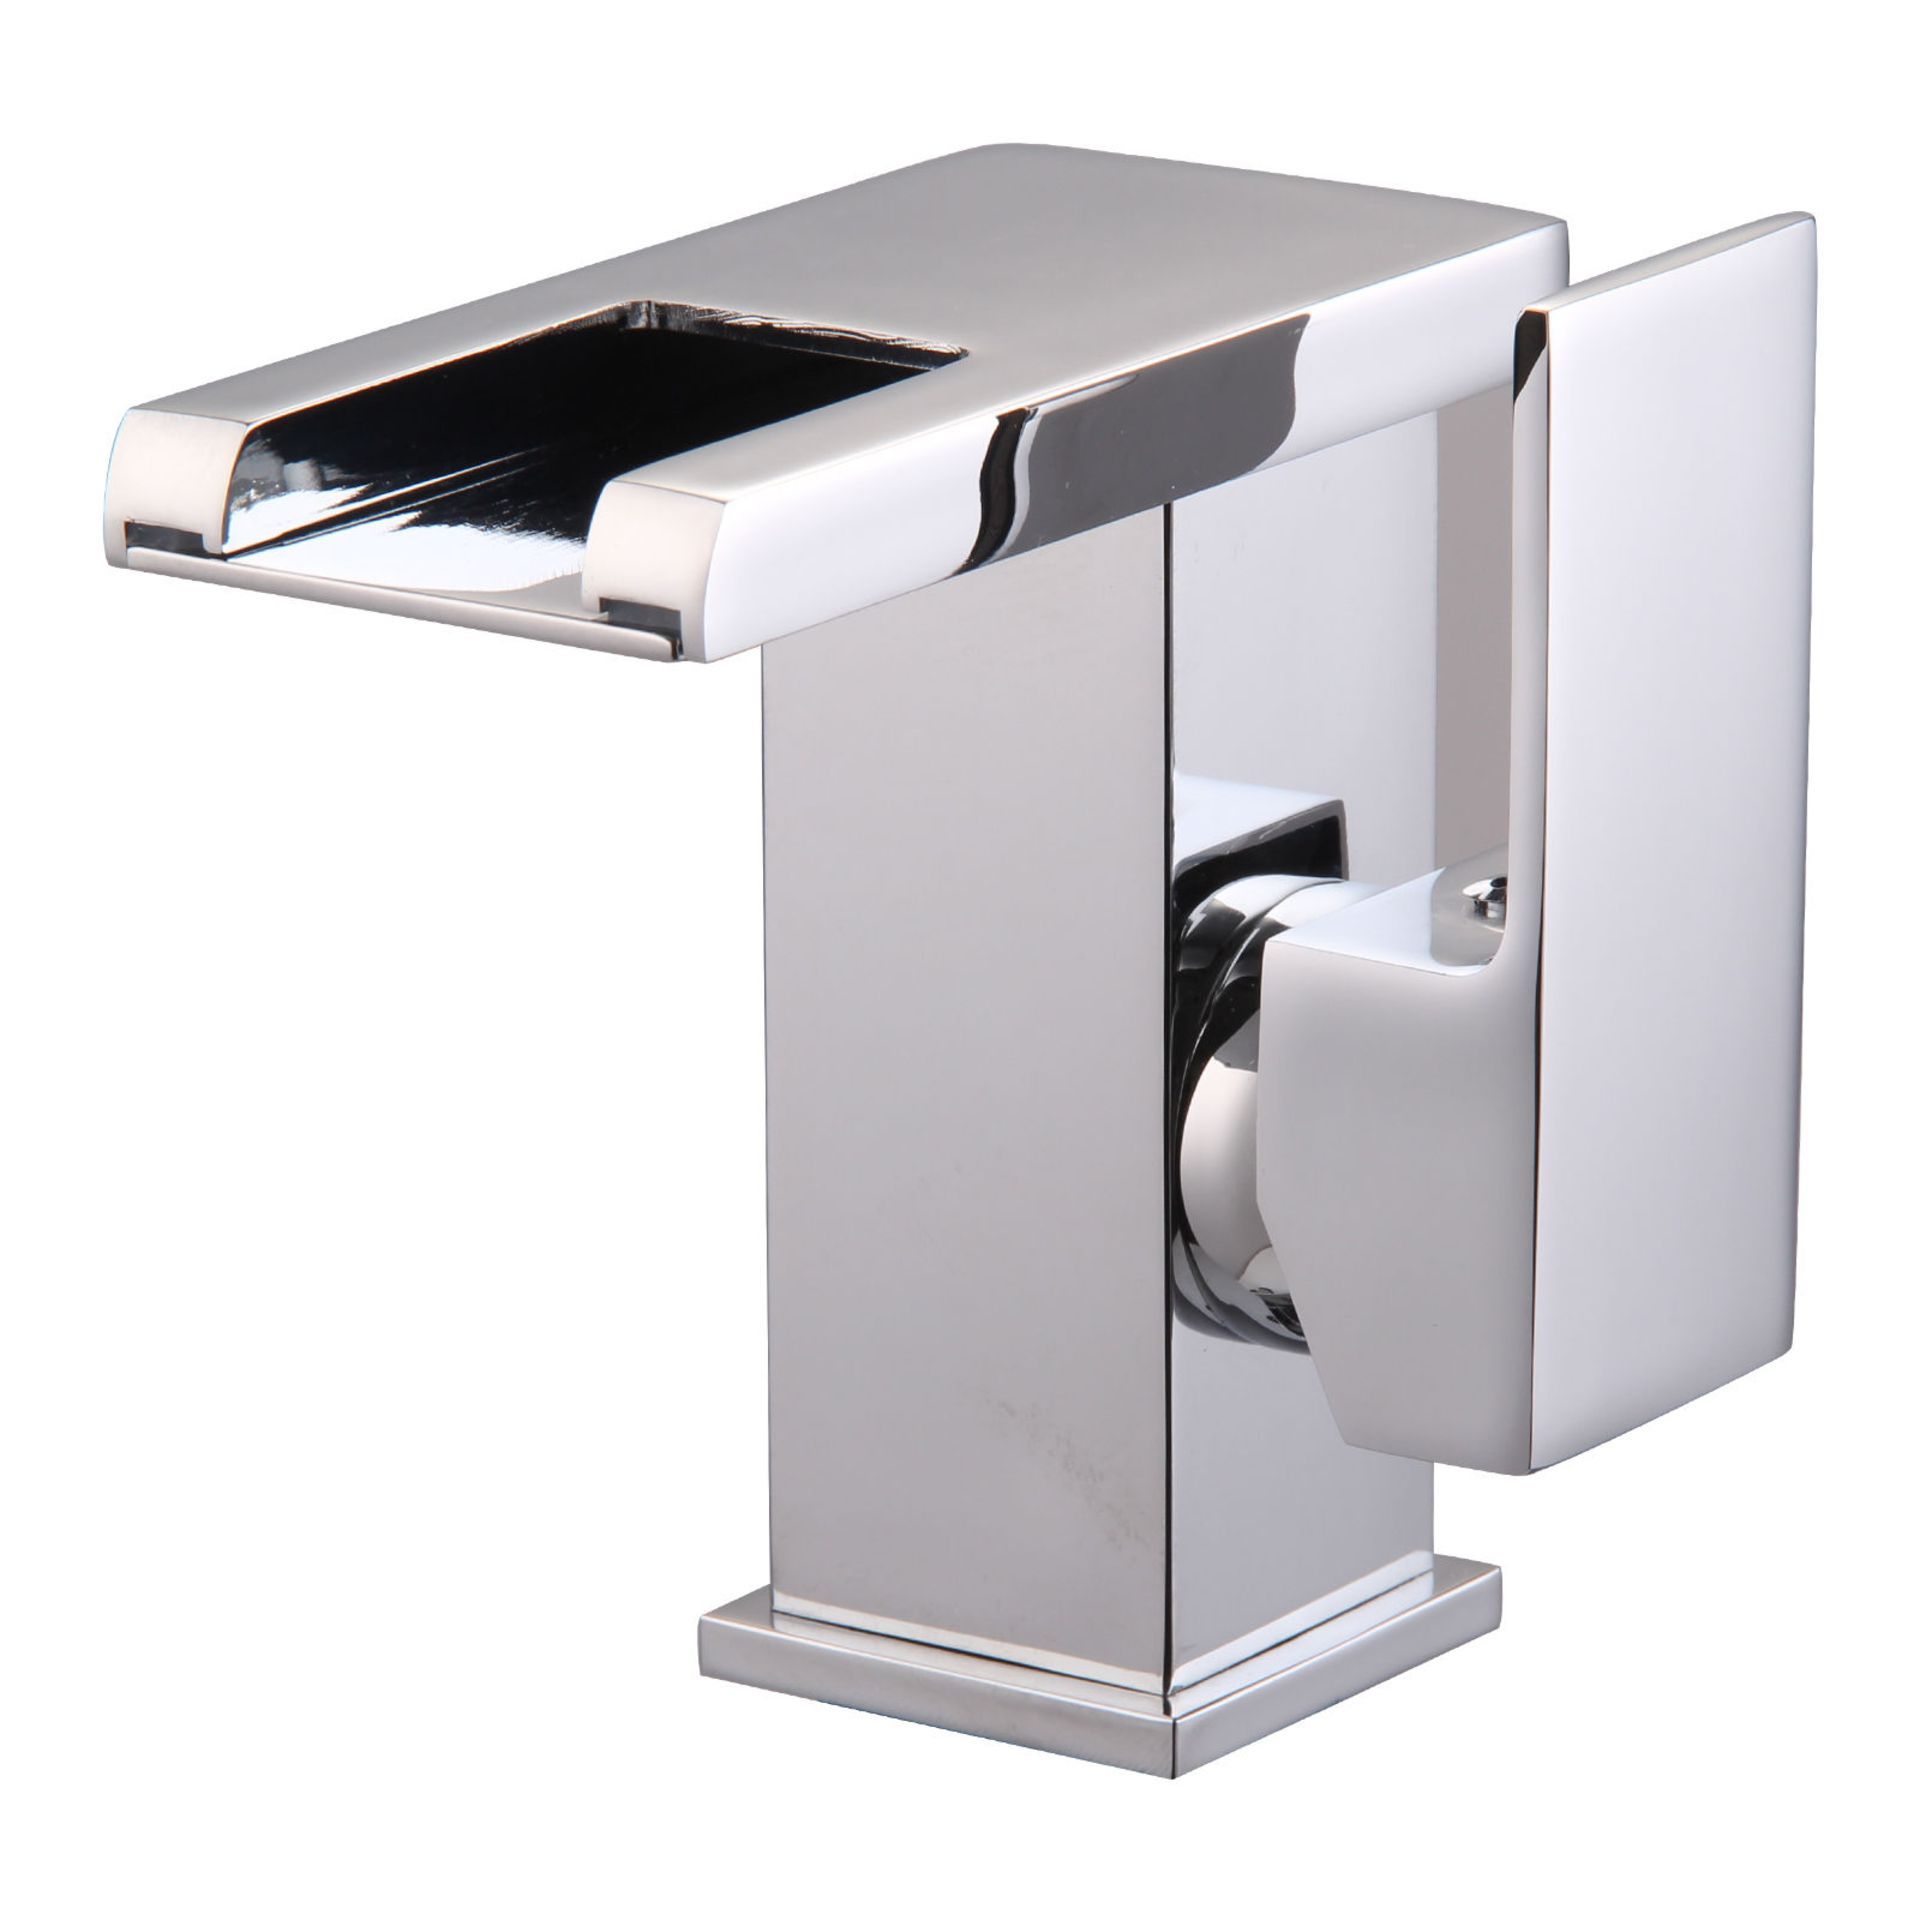 New LED Waterfall Bathroom Basin Mixer Tap. RRP £229.99.Easy To Install And Clean. All Copper _New - Image 2 of 3